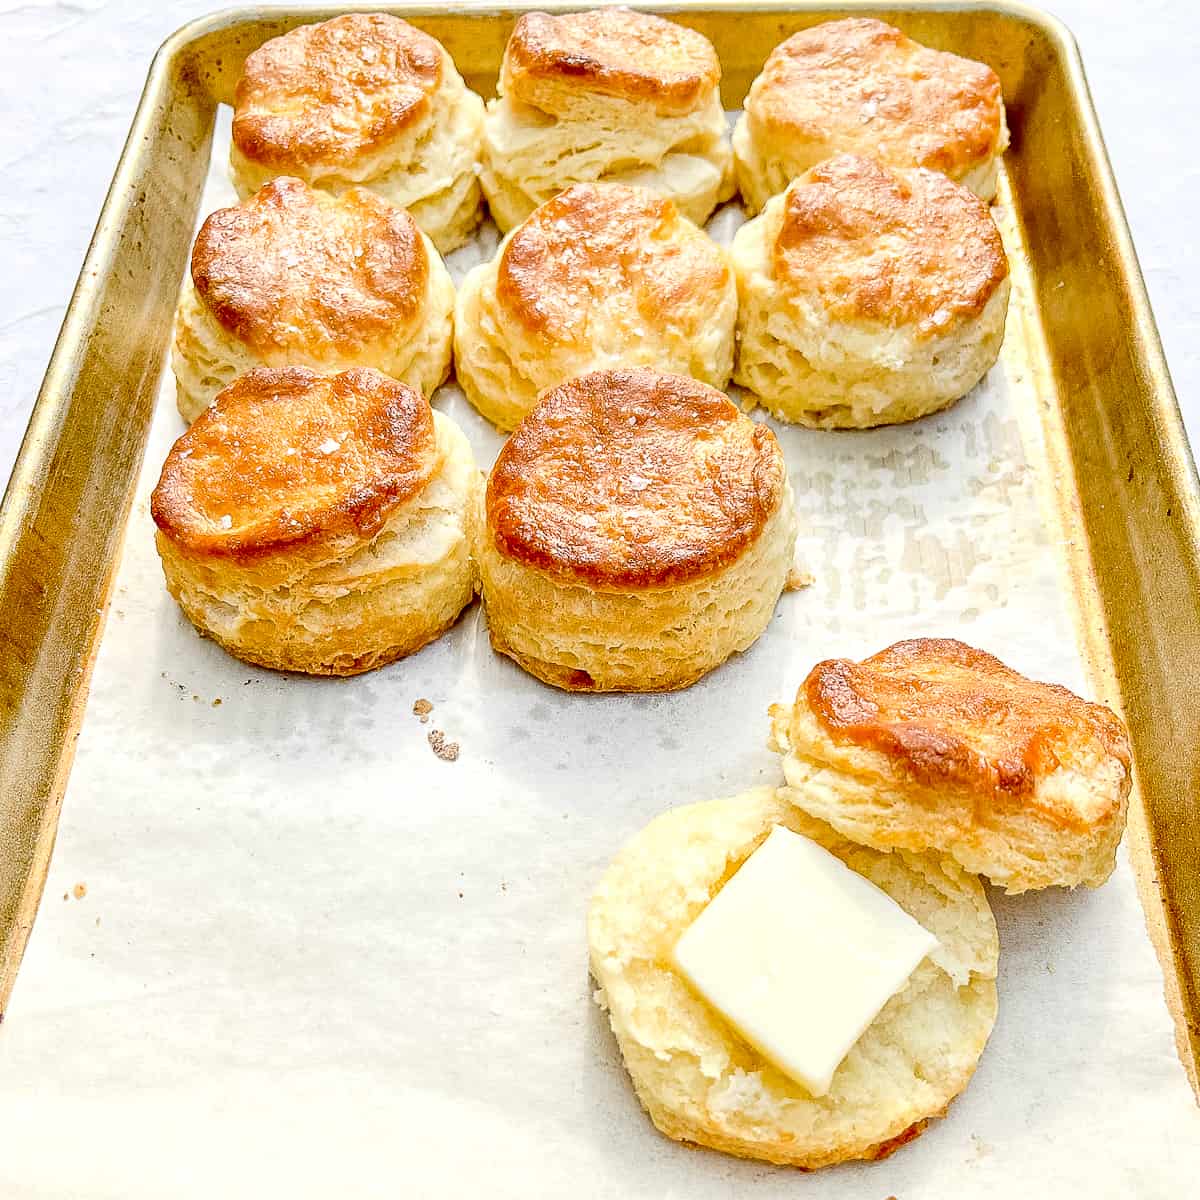 45 degree angle shot of buttermilk biscuits on a sheet pan.